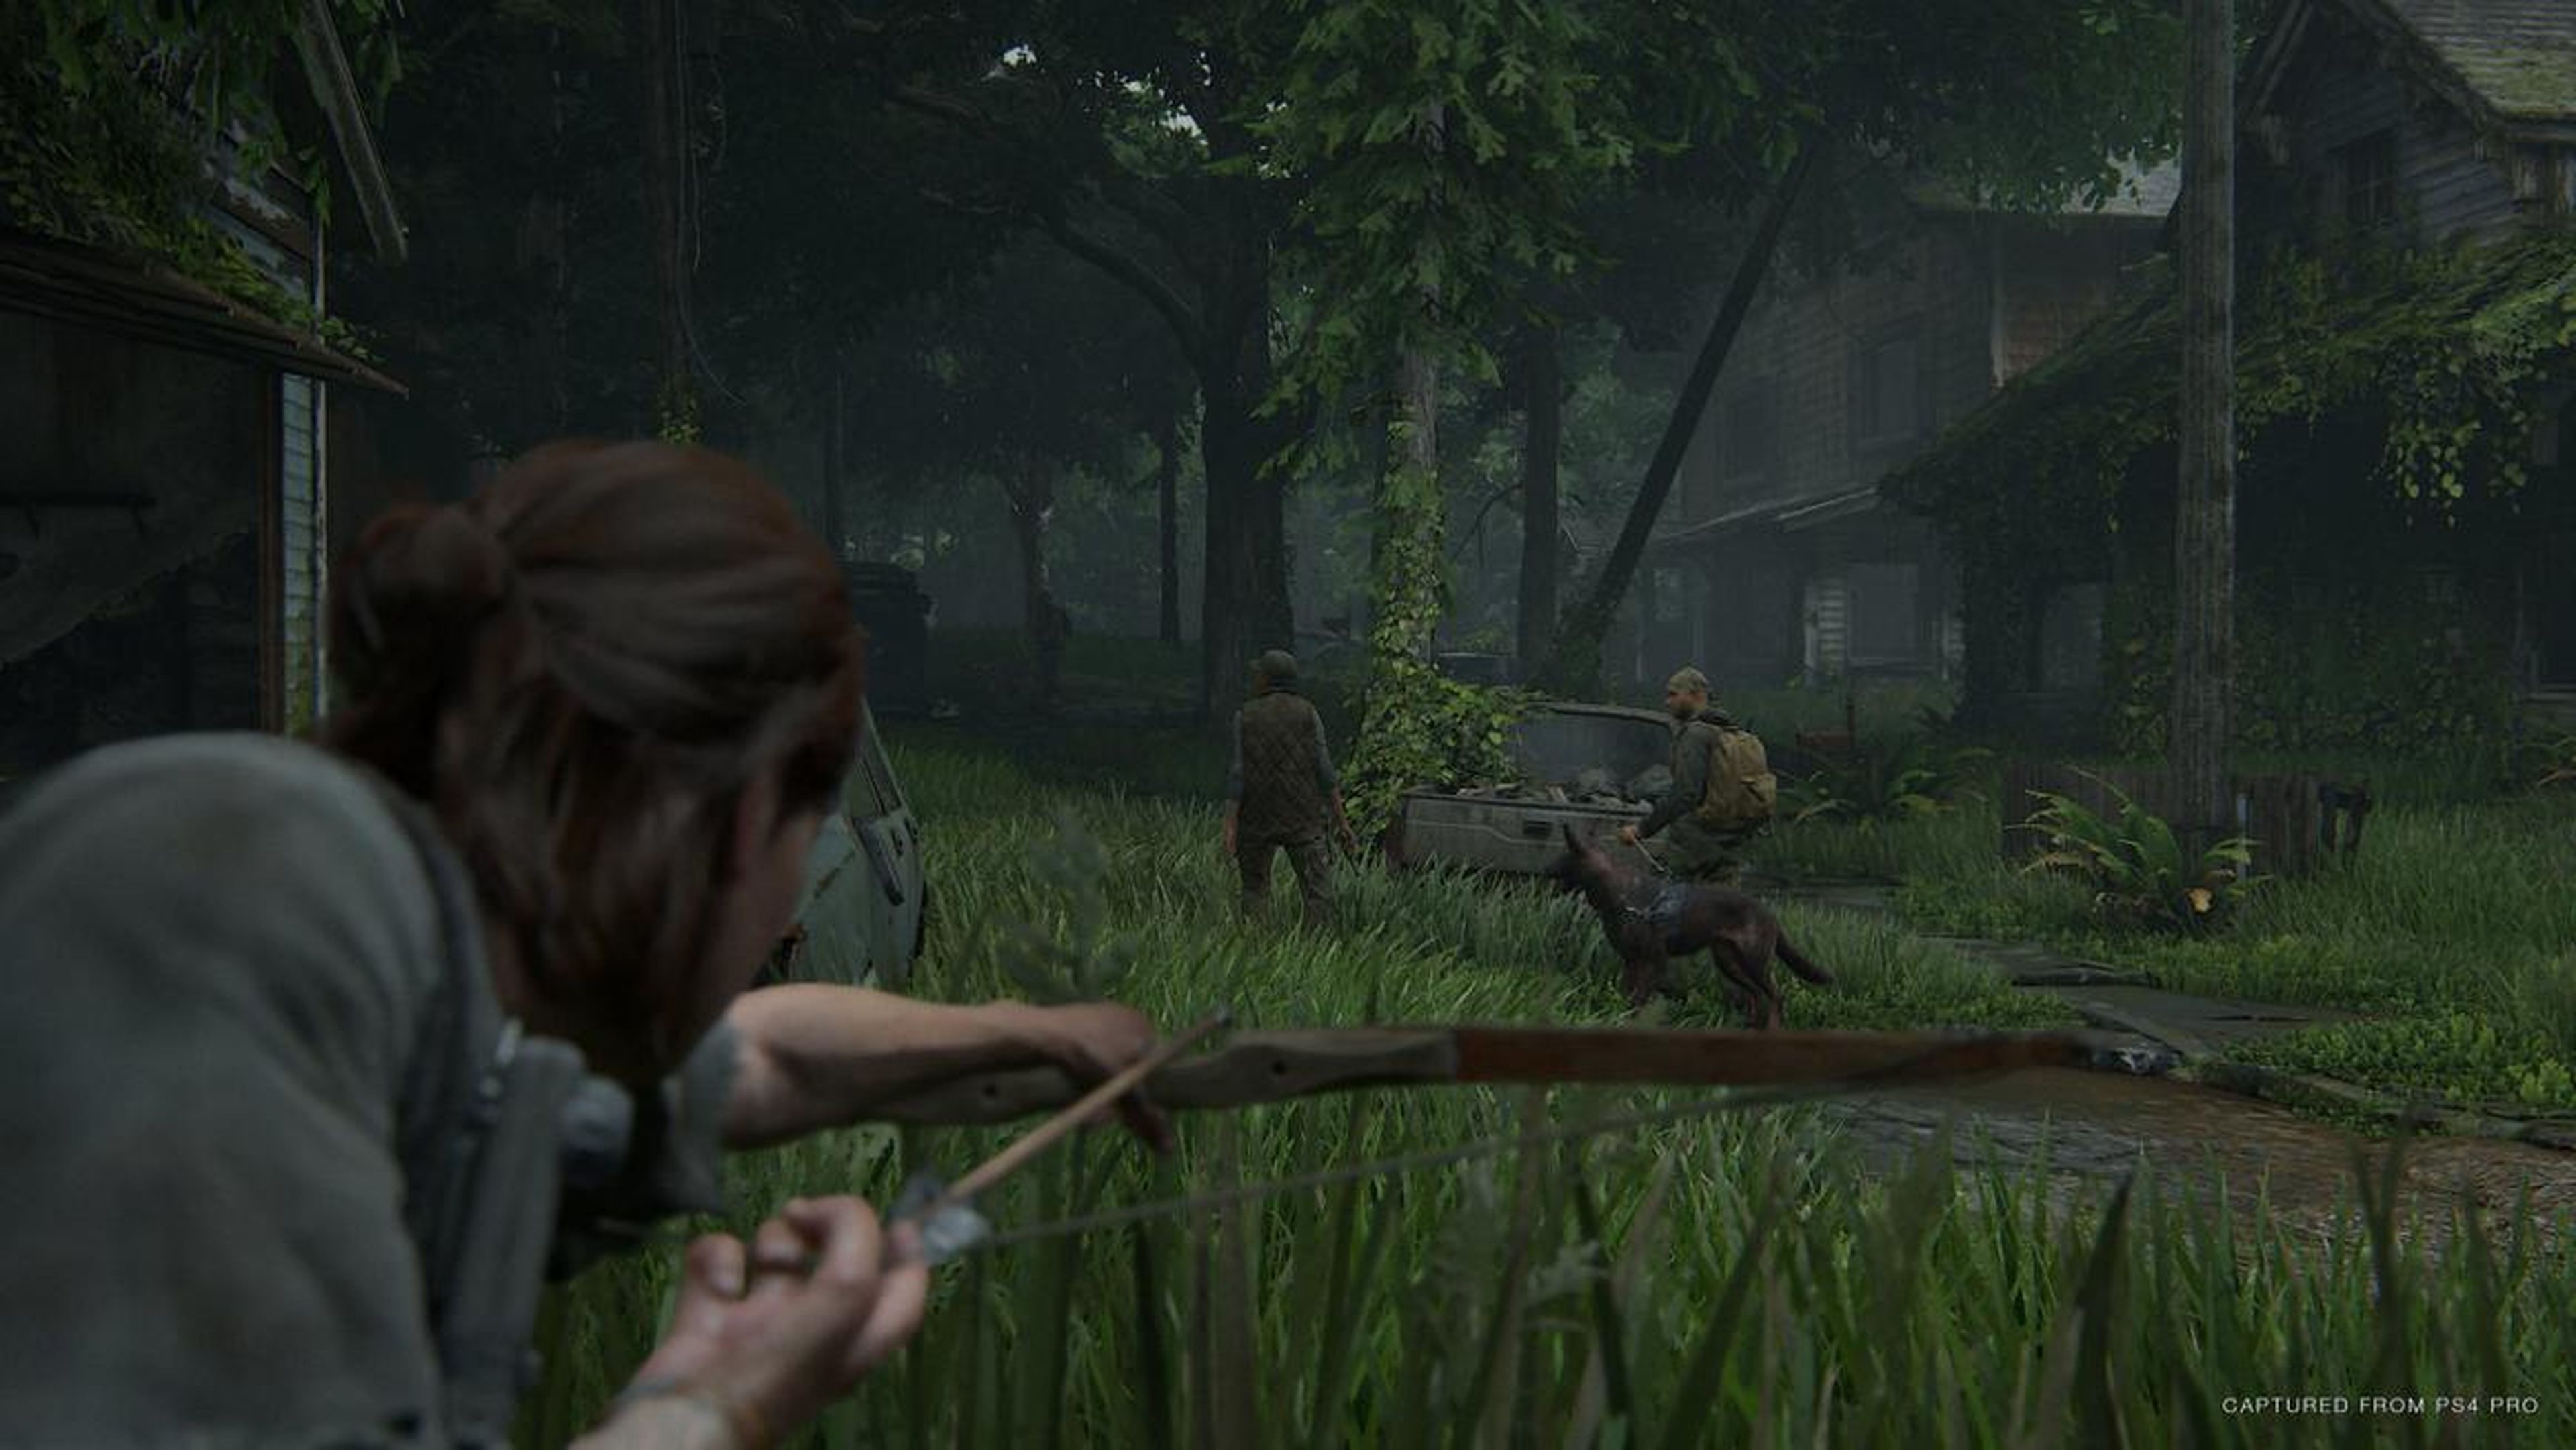 "The Last of Us Part II" will have a few new enemy types too. Guard dogs will track your scent, and new infected monsters have poisonous attacks.